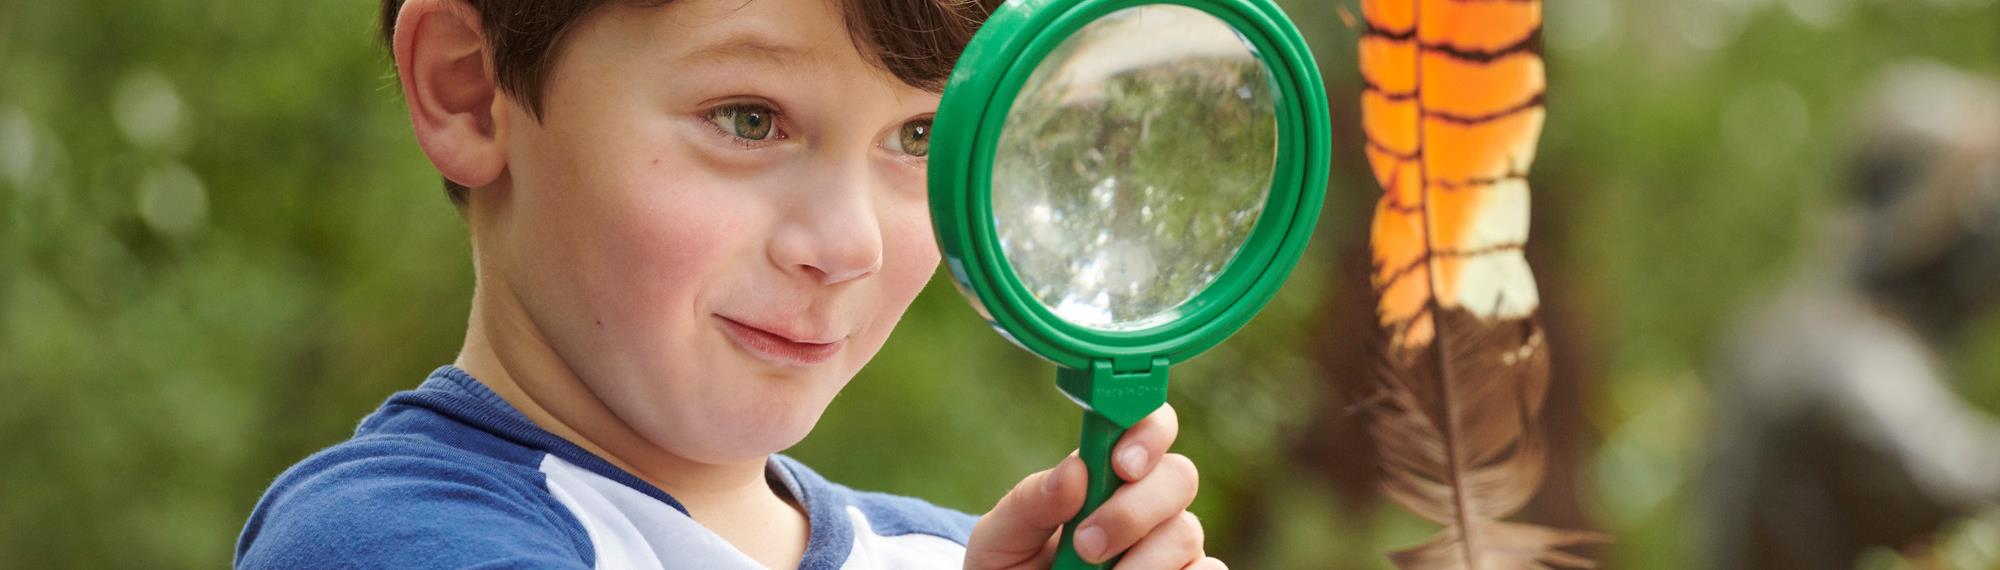 Kindergarten boy looking through a green magnifying glass to examine a brightly coloured orange and black striped feather.